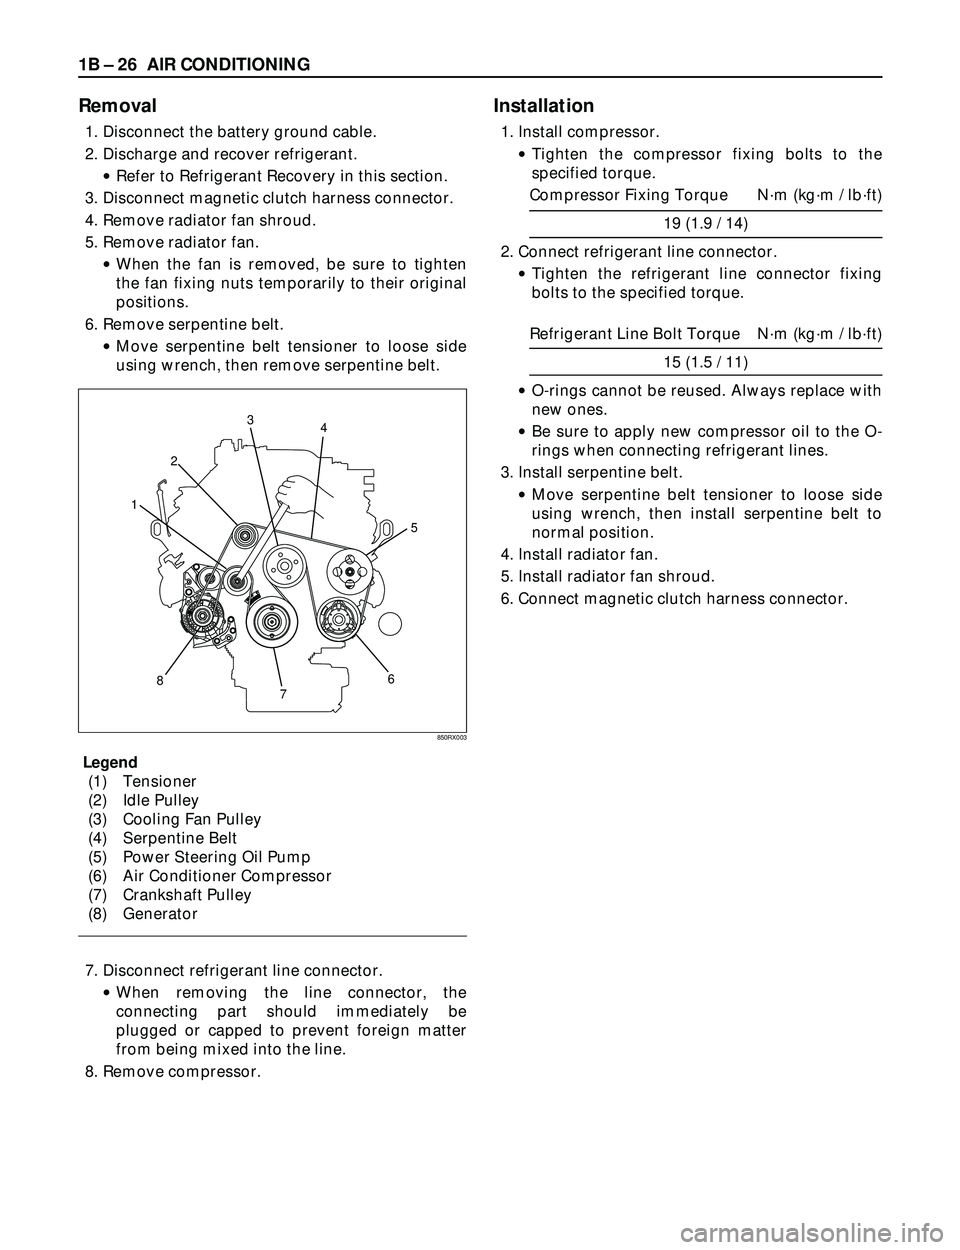 ISUZU TROOPER 1998  Service Repair Manual 1B Ð 26 AIR CONDITIONING
Removal
1. Disconnect the battery ground cable.
2. Discharge and recover refrigerant.
·Refer to Refrigerant Recovery in this section.
3. Disconnect magnetic clutch harness c